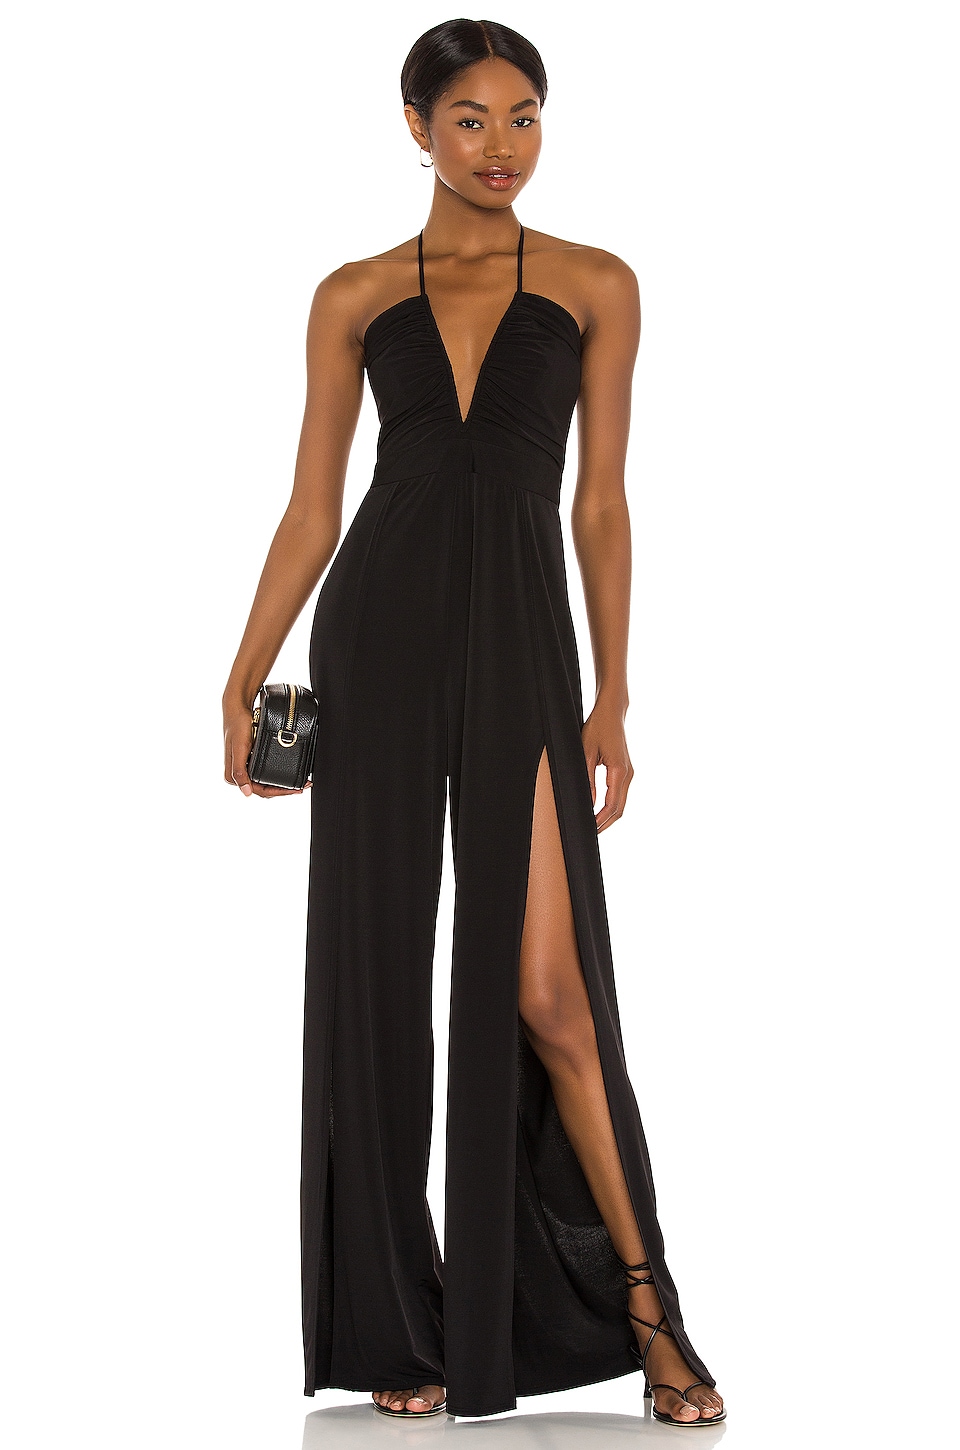 Sexy Black Designer Jumpsuit for Evening with Slits in Leg, Halter neck, low neck, and spandex